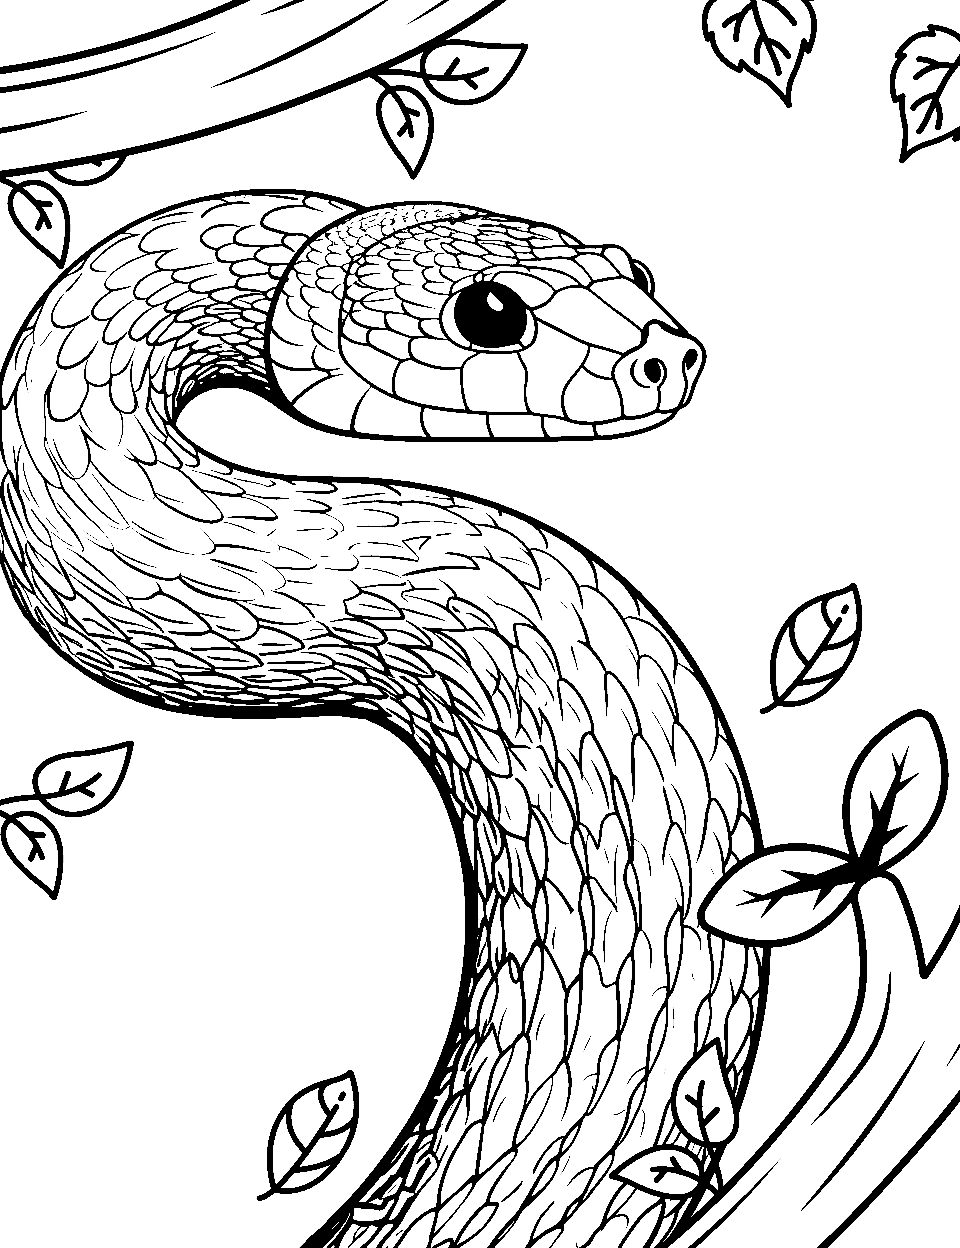 Tree Canopy Dweller Coloring Page - A green snake camouflaged among the green leaves of a tree.